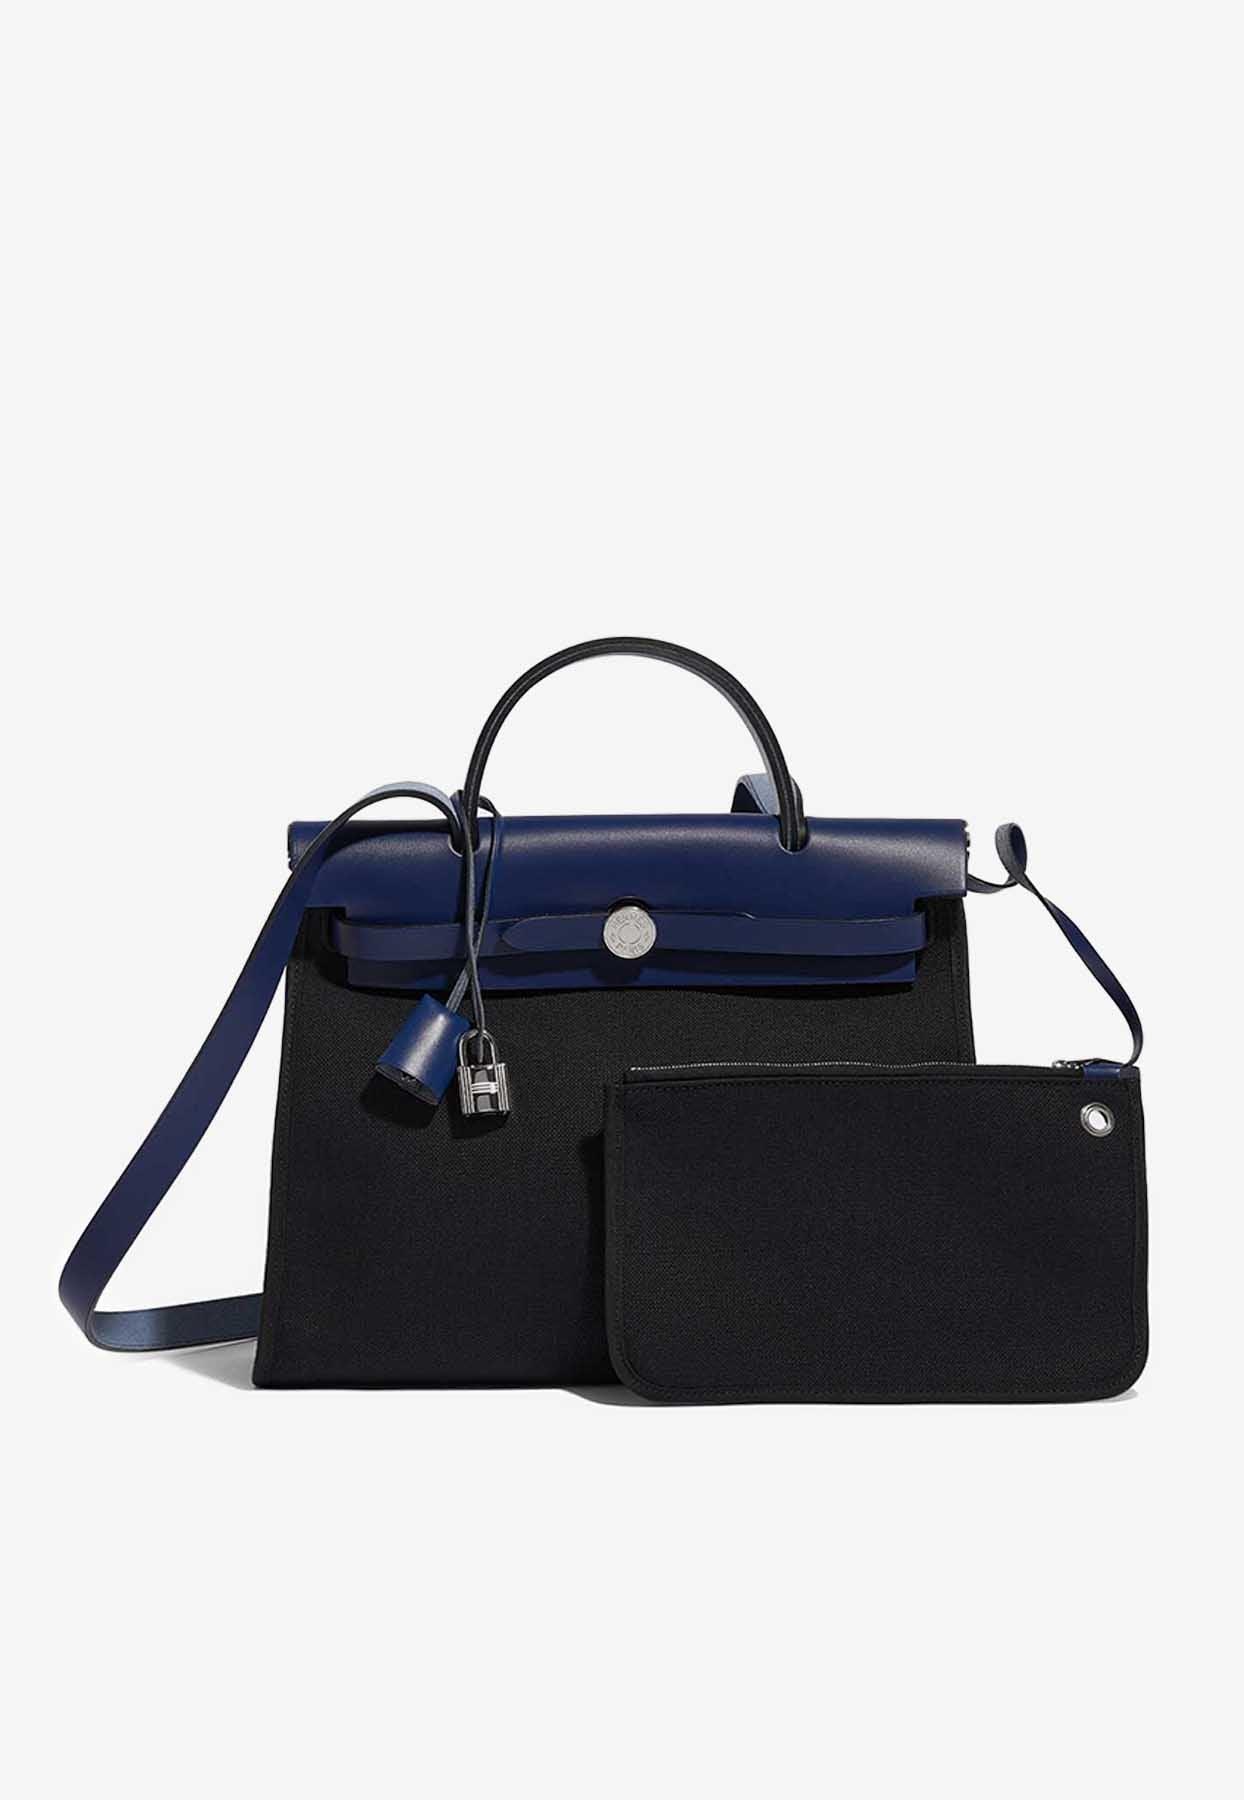 Hermes Blue Marine Vache Leather & Canvas Herbag Cabas PM Tote Bag